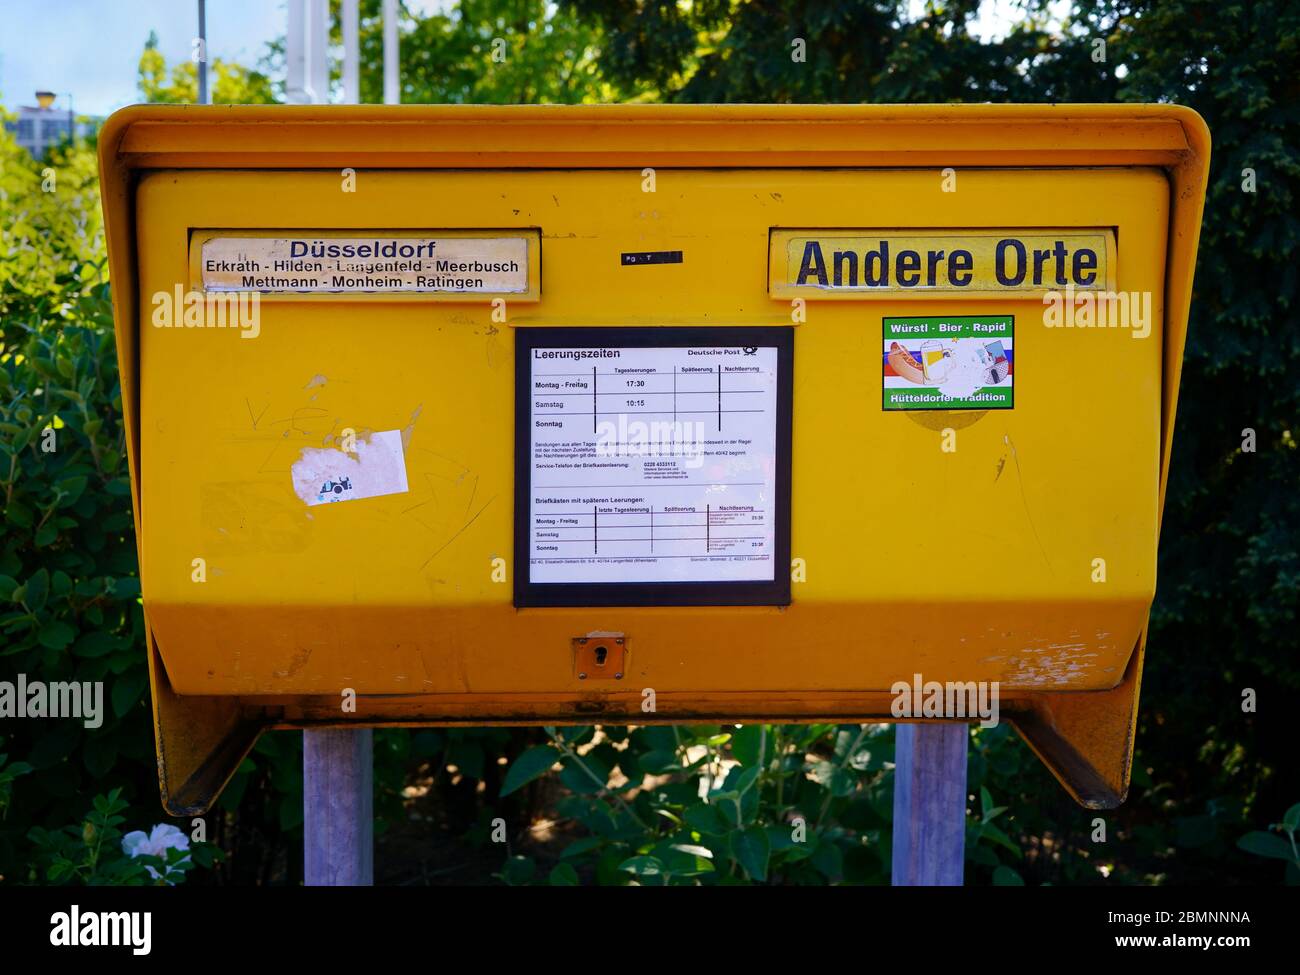 Yellow German Mailbox High Resolution Stock Photography and Images - Alamy